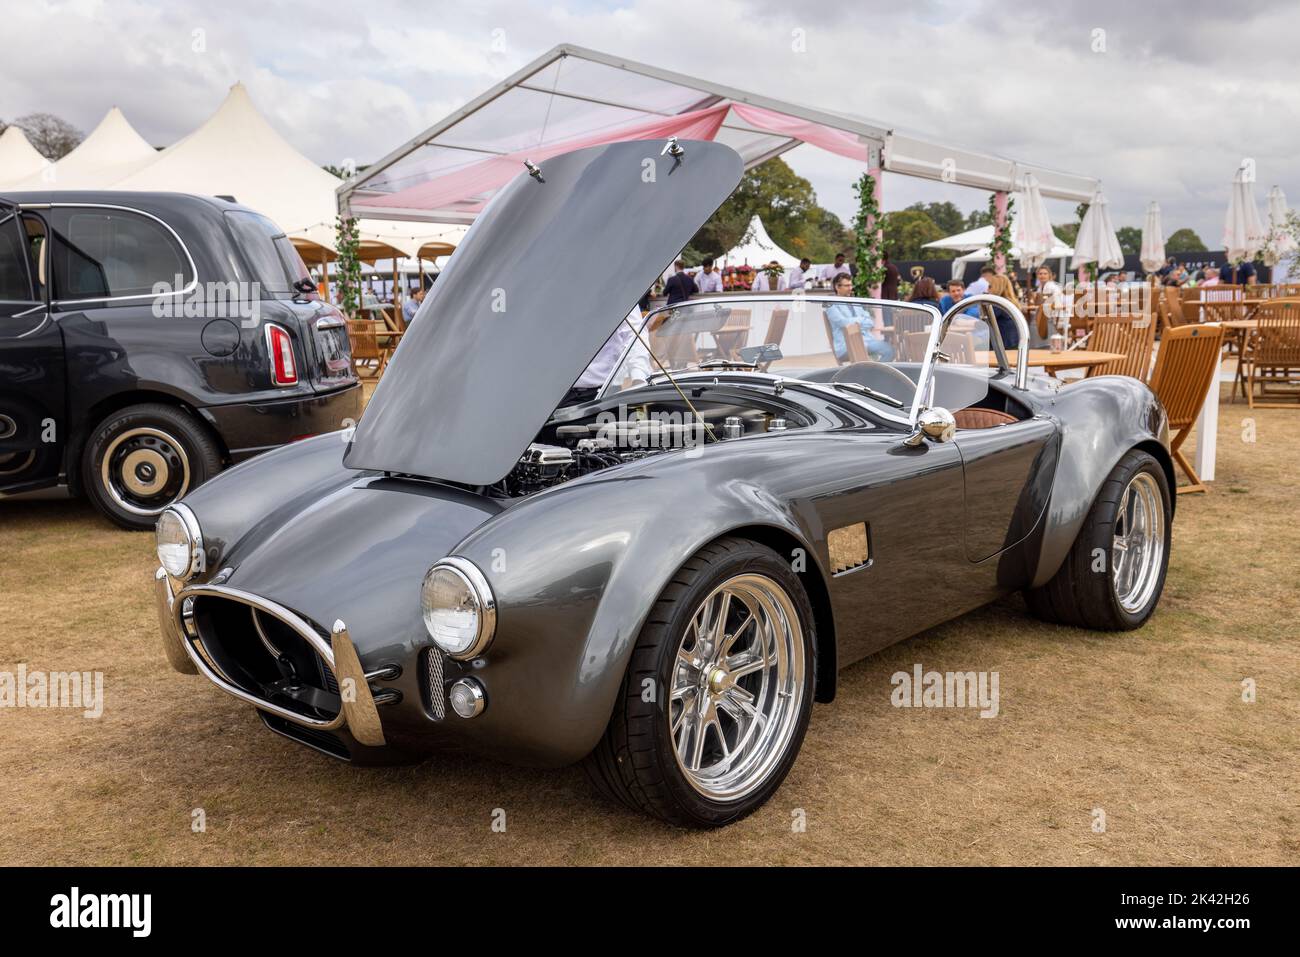 2022 Superformance MkIII Cobra, on display at the Salon Privé Concours d’Elégance motor show held at Blenheim Palace Stock Photo